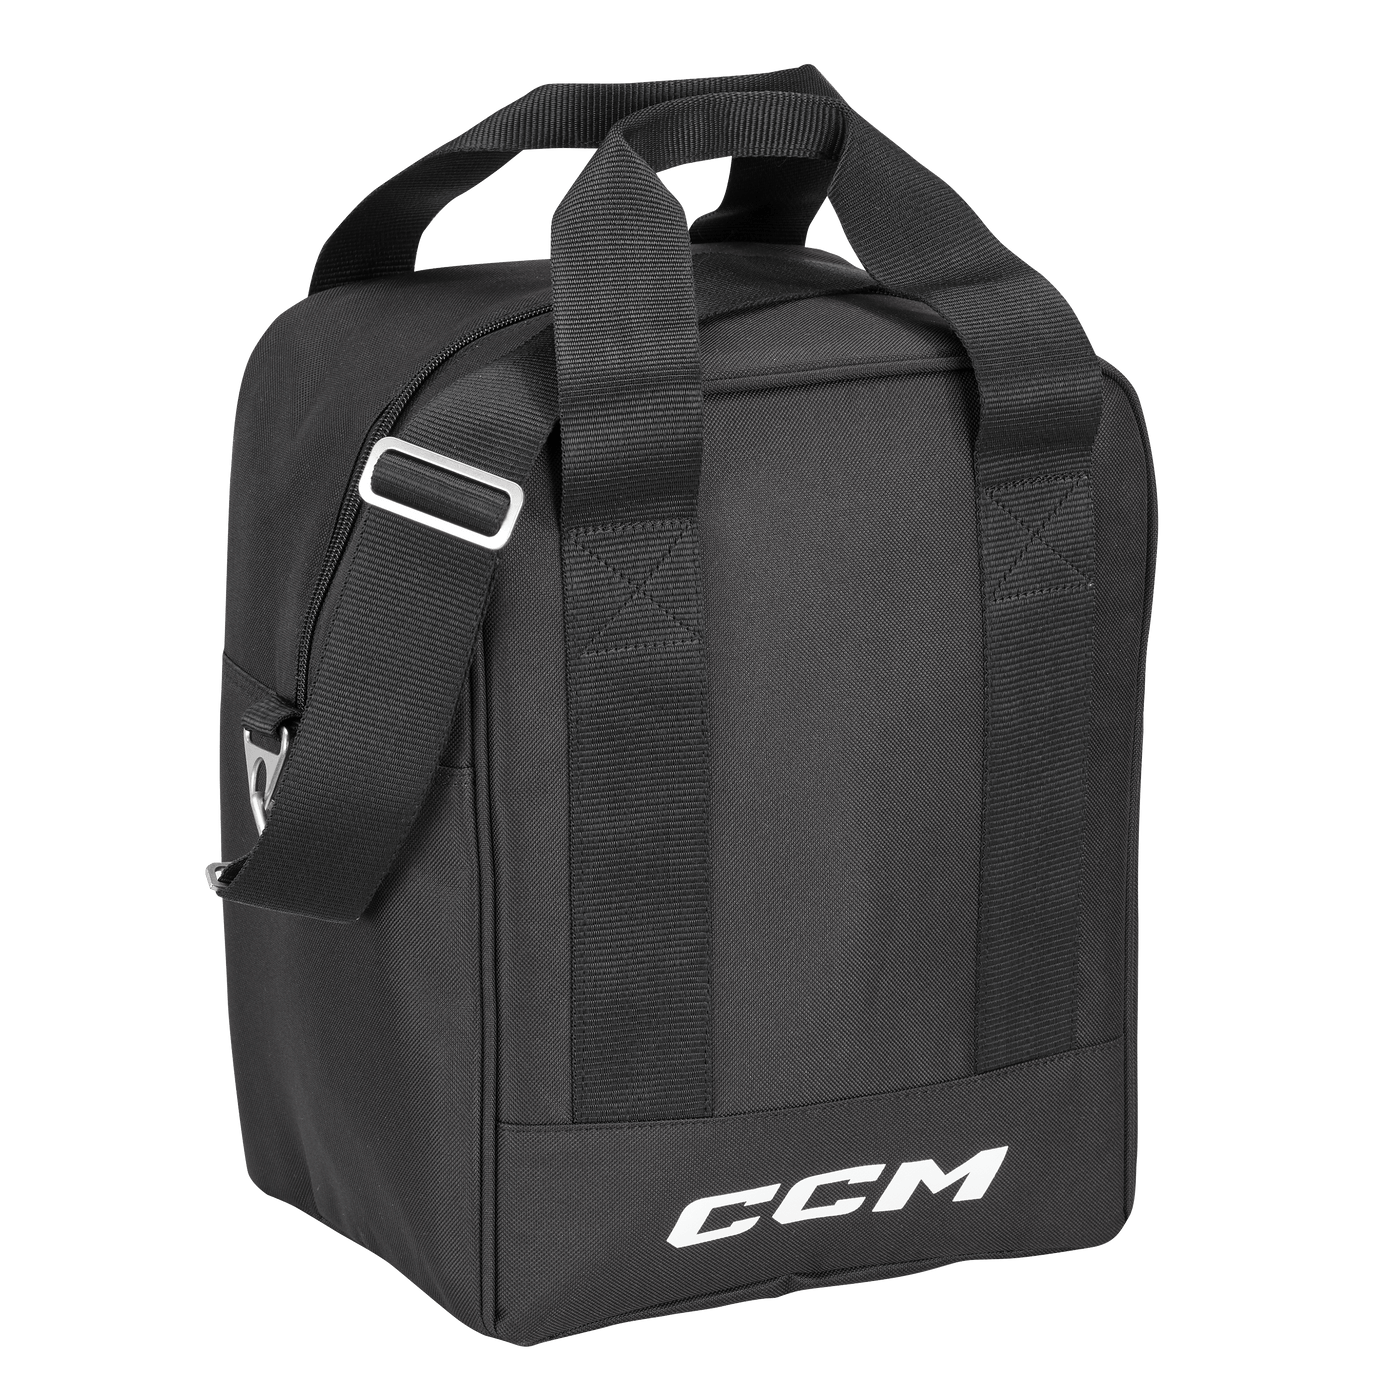 CCM Deluxe Puck Bag - The Hockey Shop Source For Sports